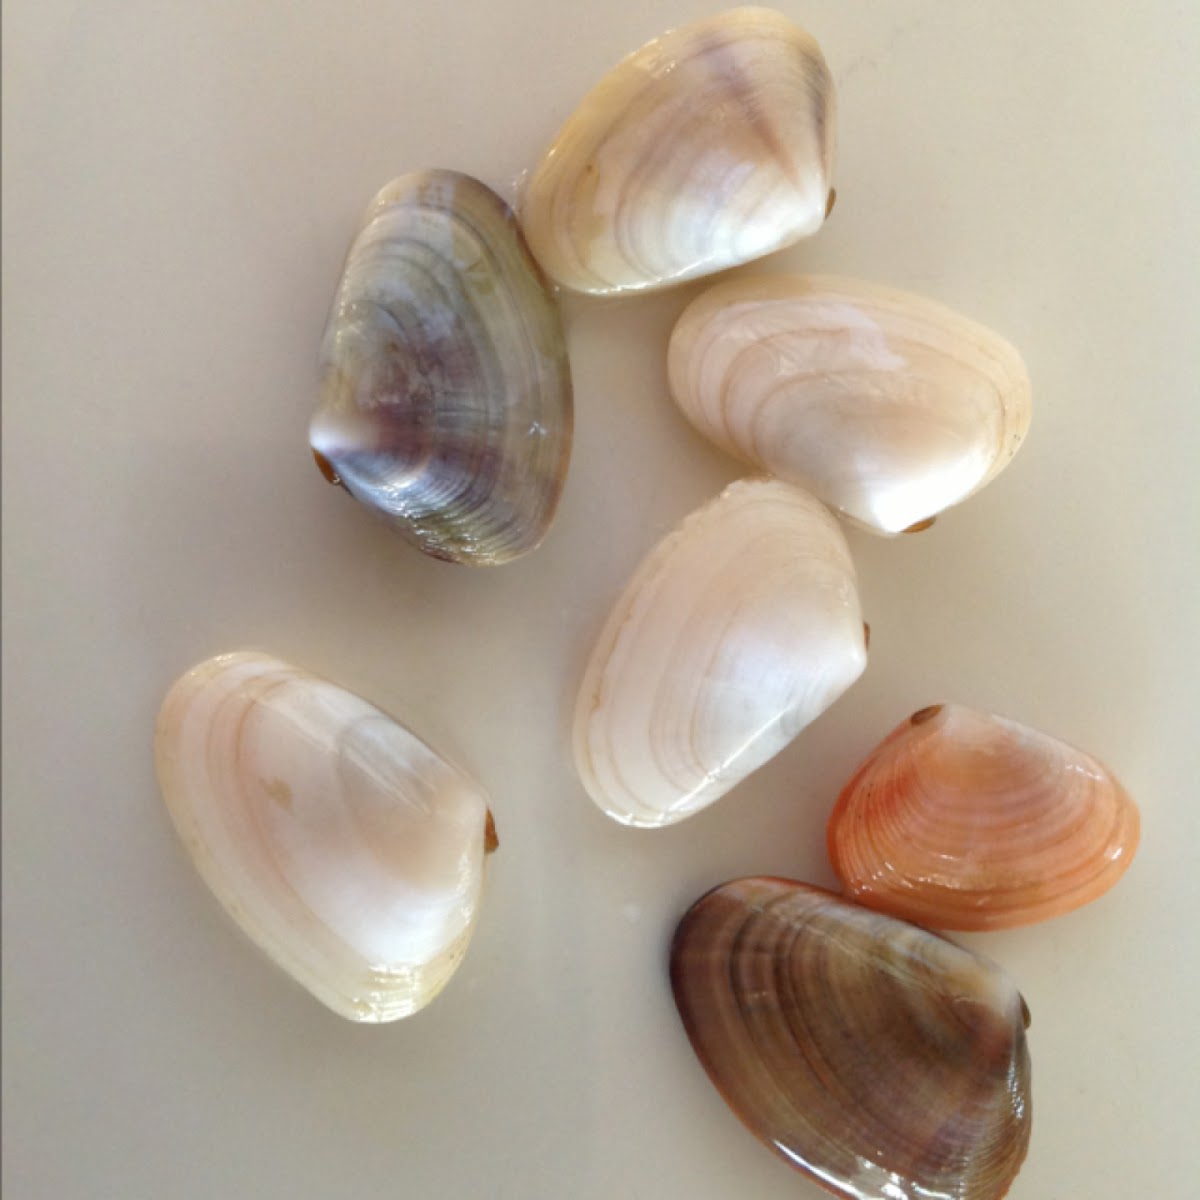 Common Pipi, Goolwa cockle, surf clam